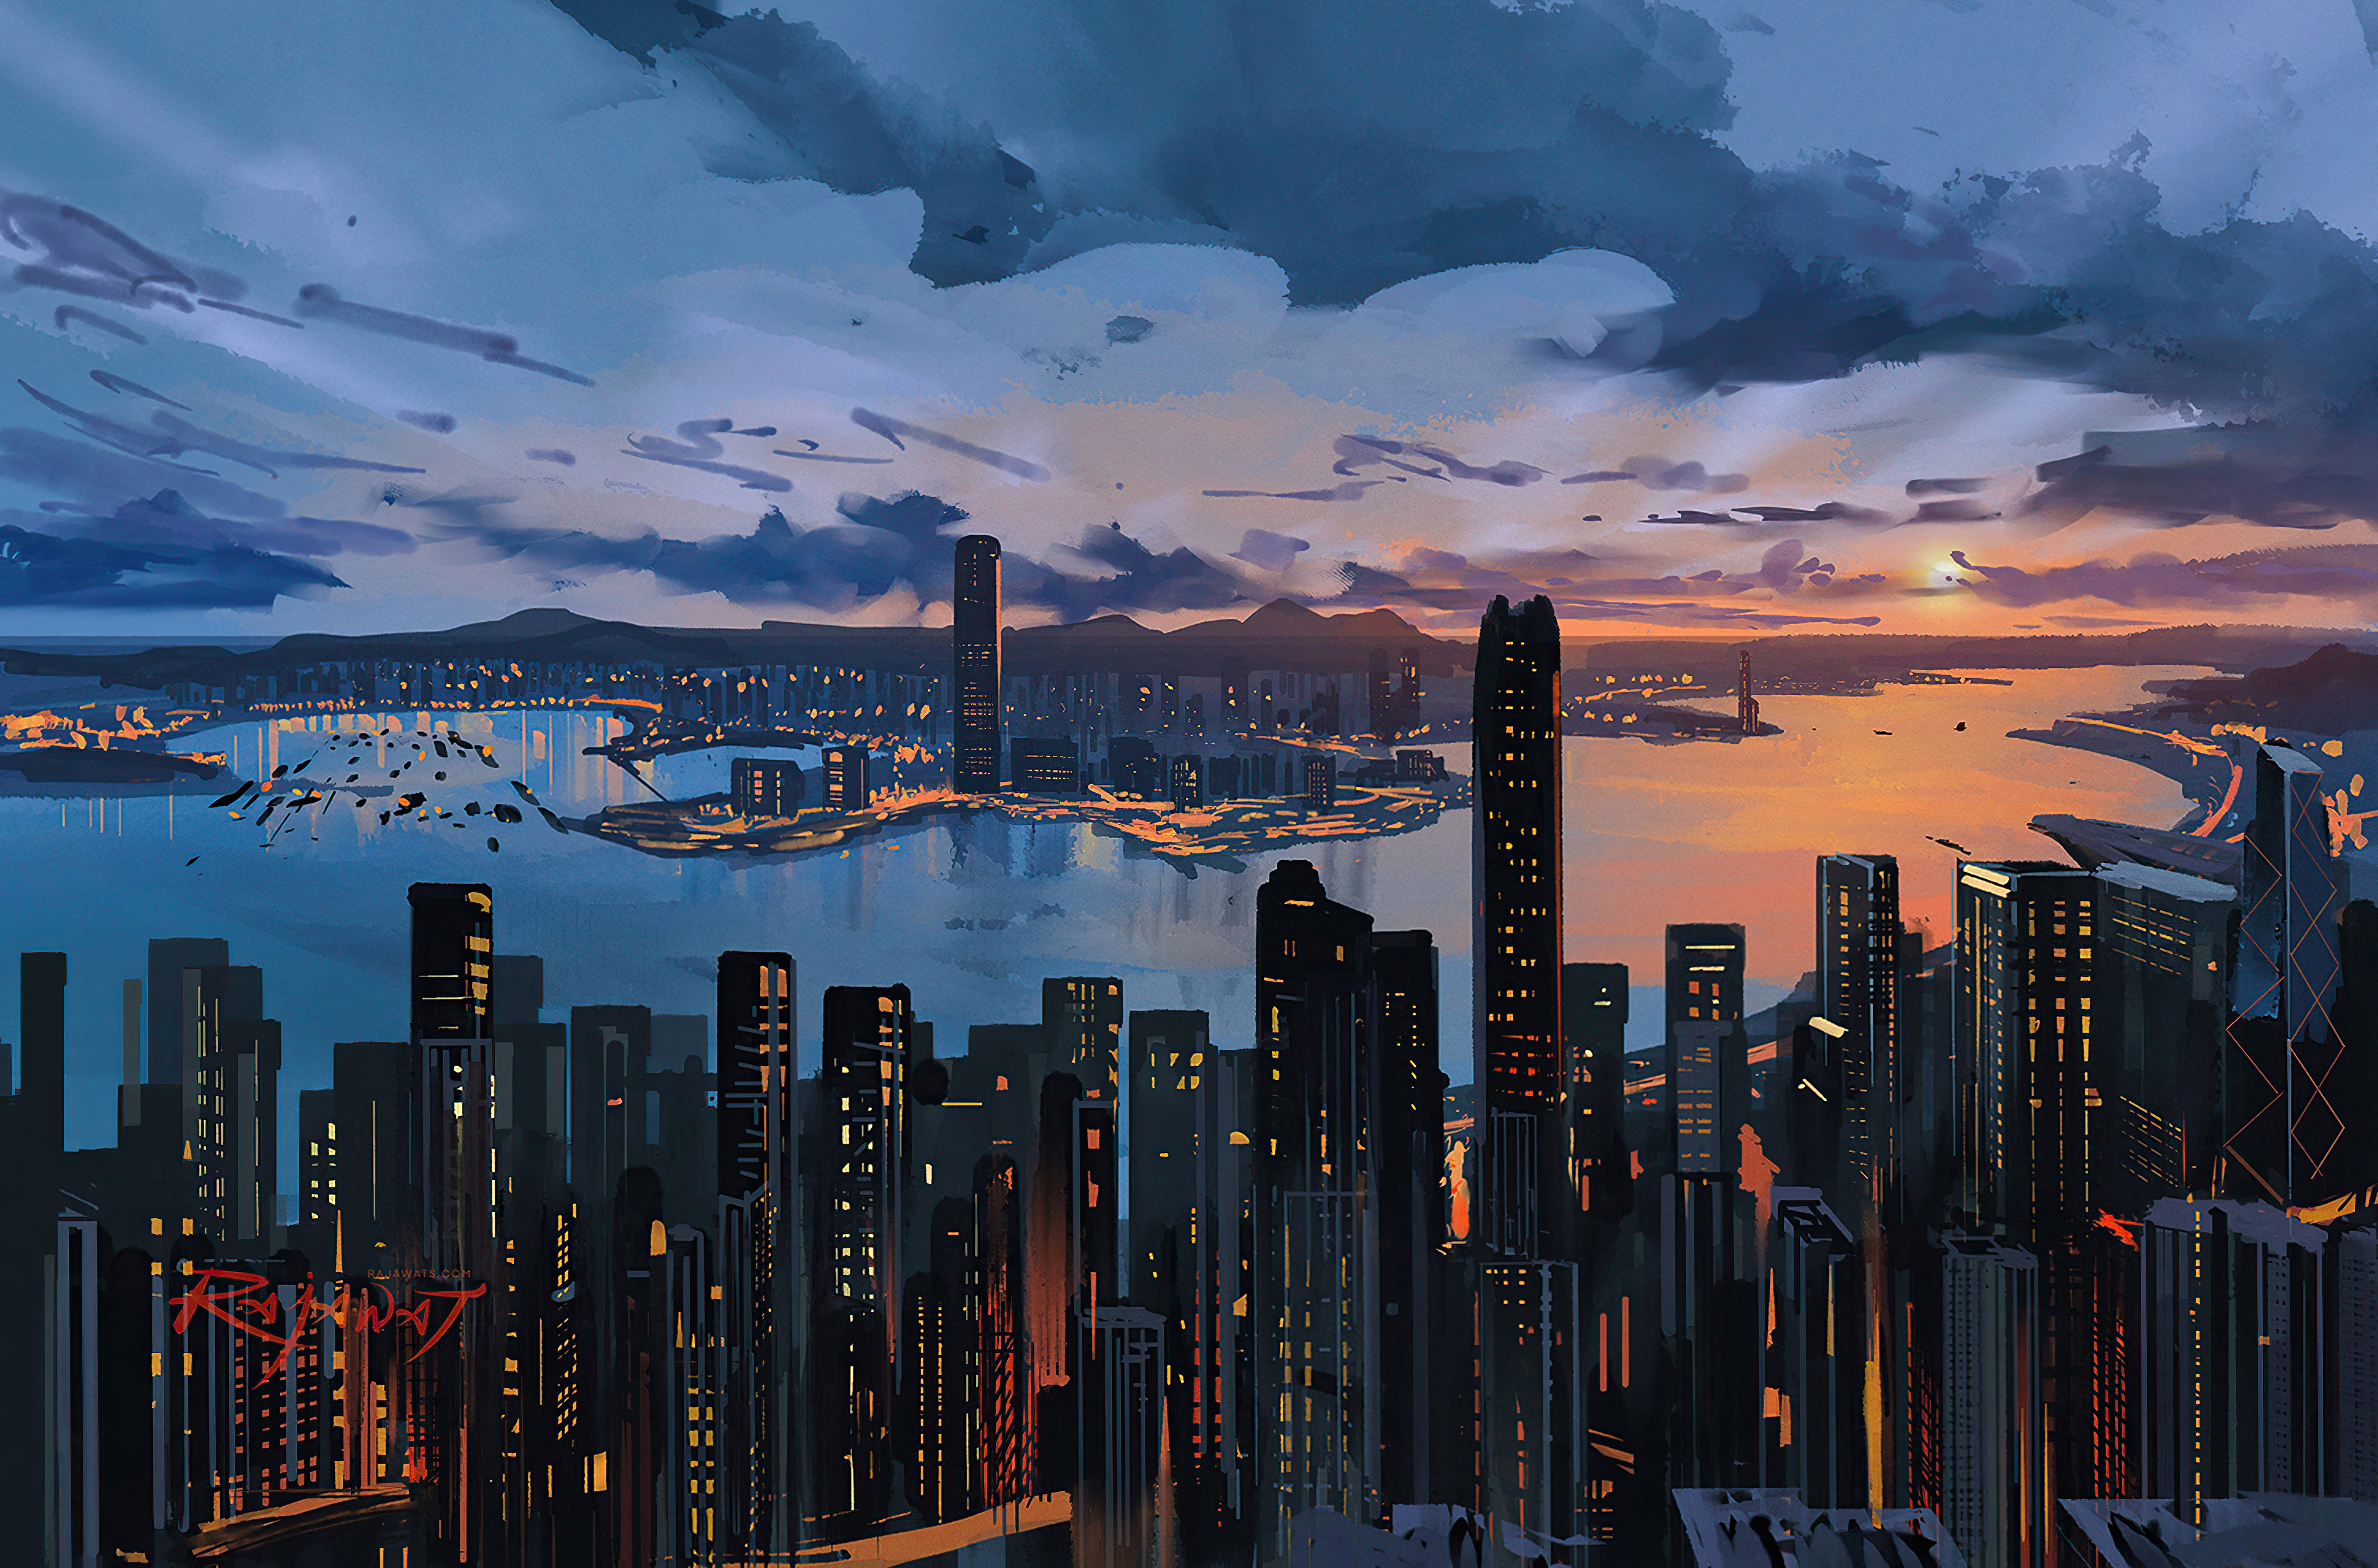 A drawing of the city at sunset